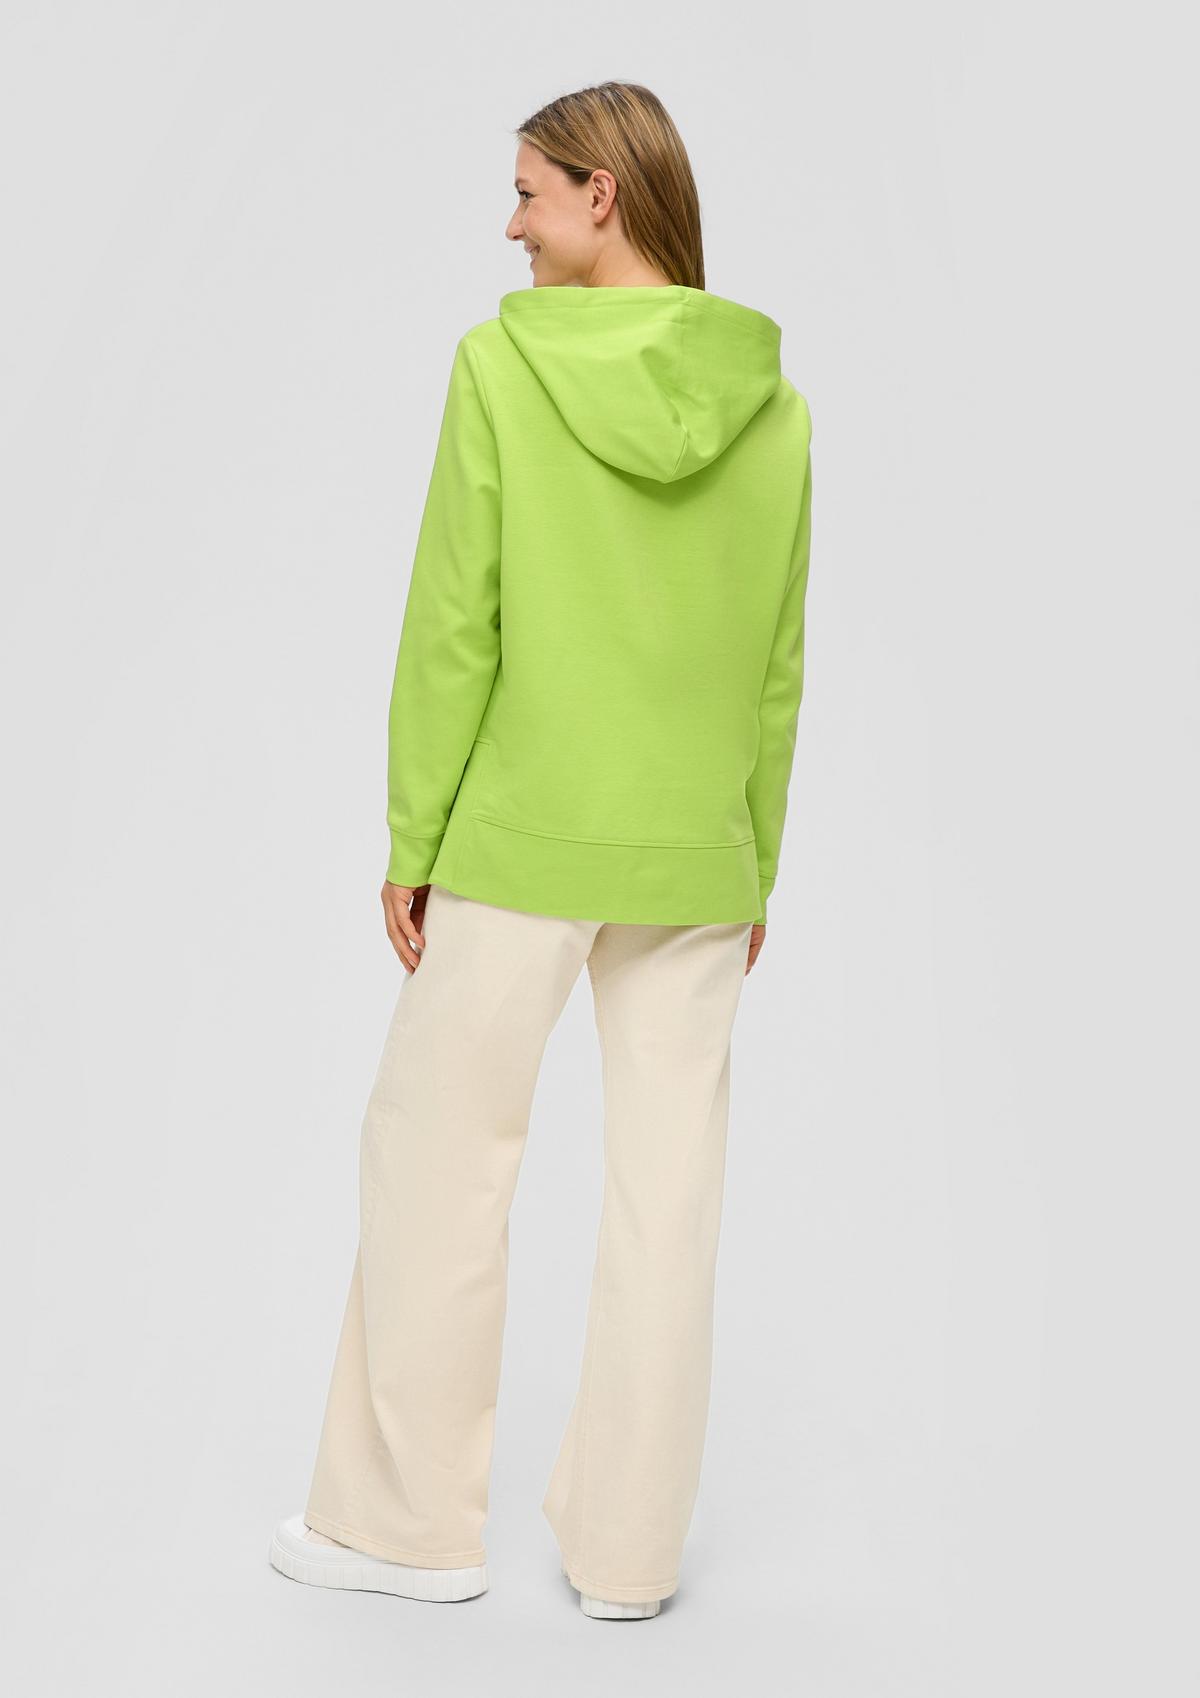 s.Oliver Soft sweatshirt with a hood